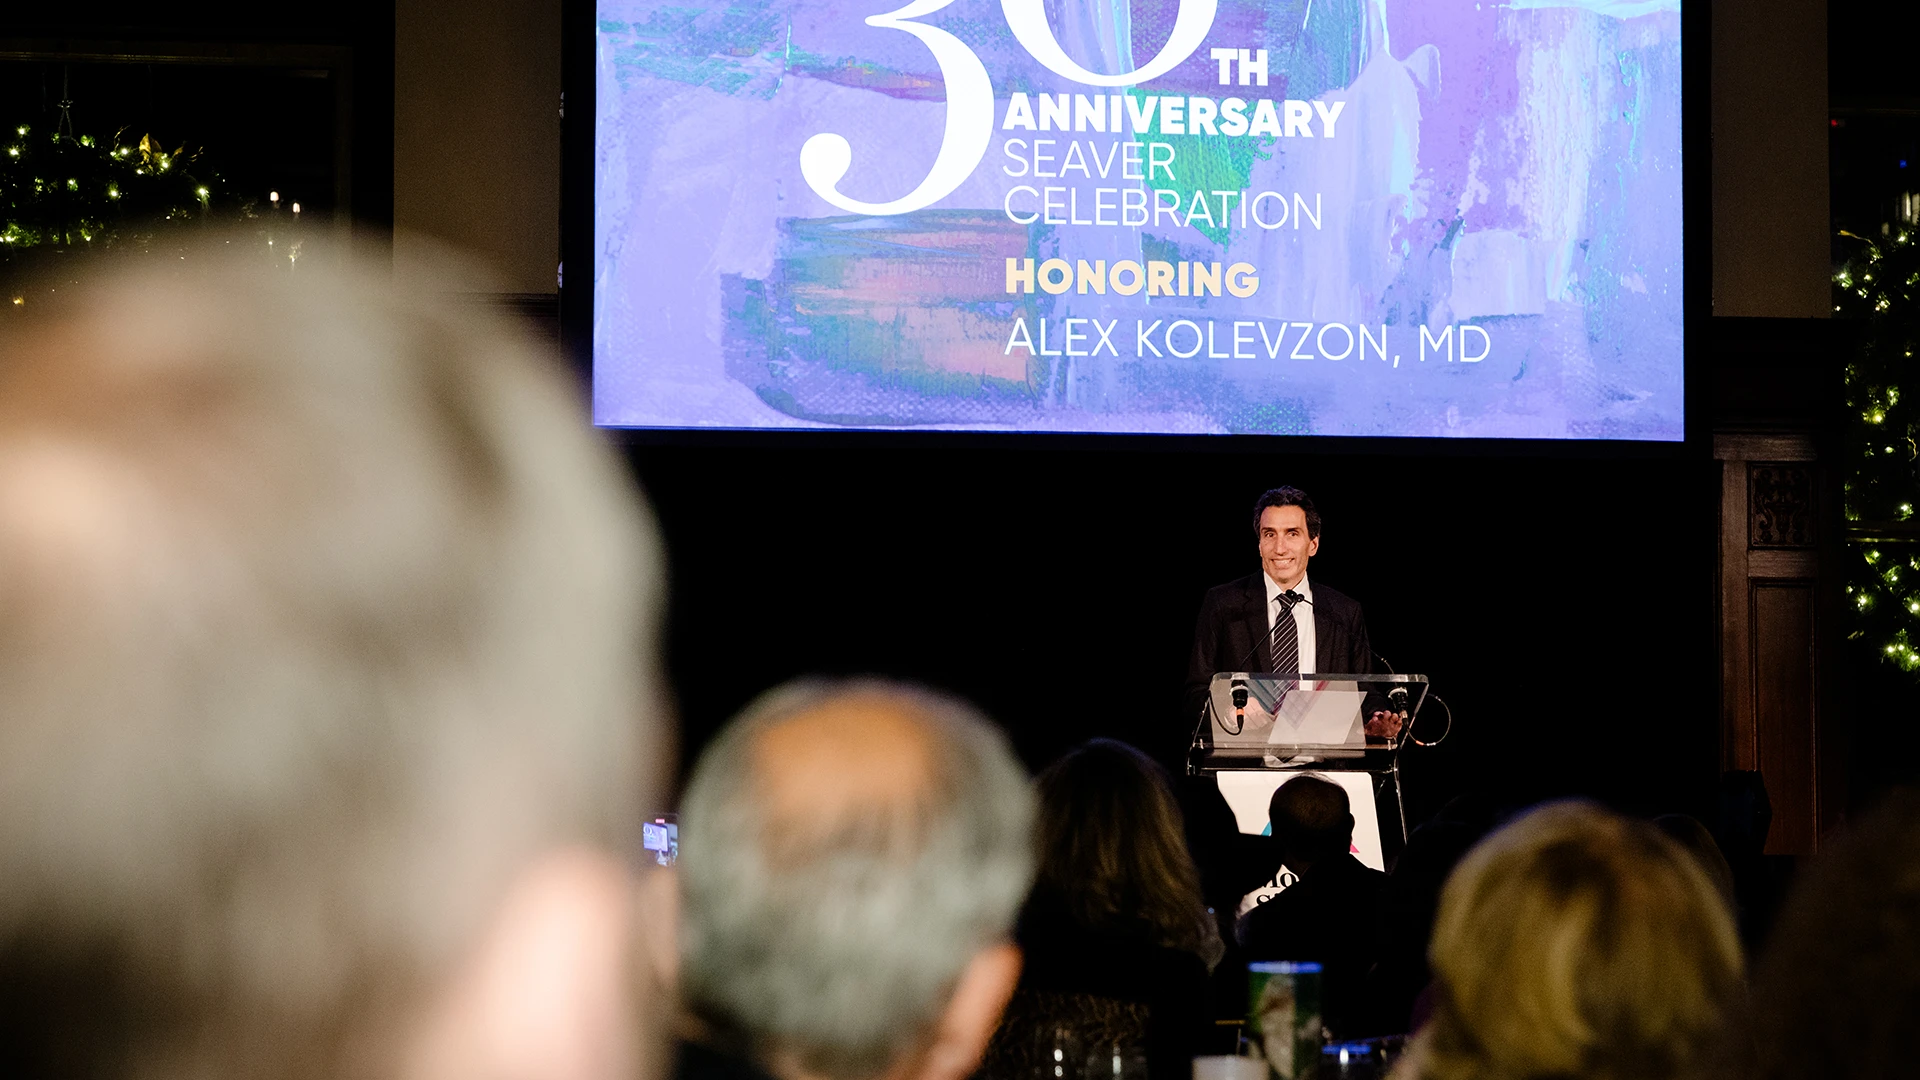 Alexander Kolevzon, MD, was honored at the Seaver Autism Center’s 30th anniversary gala for serving as its clinical director for 16 years.